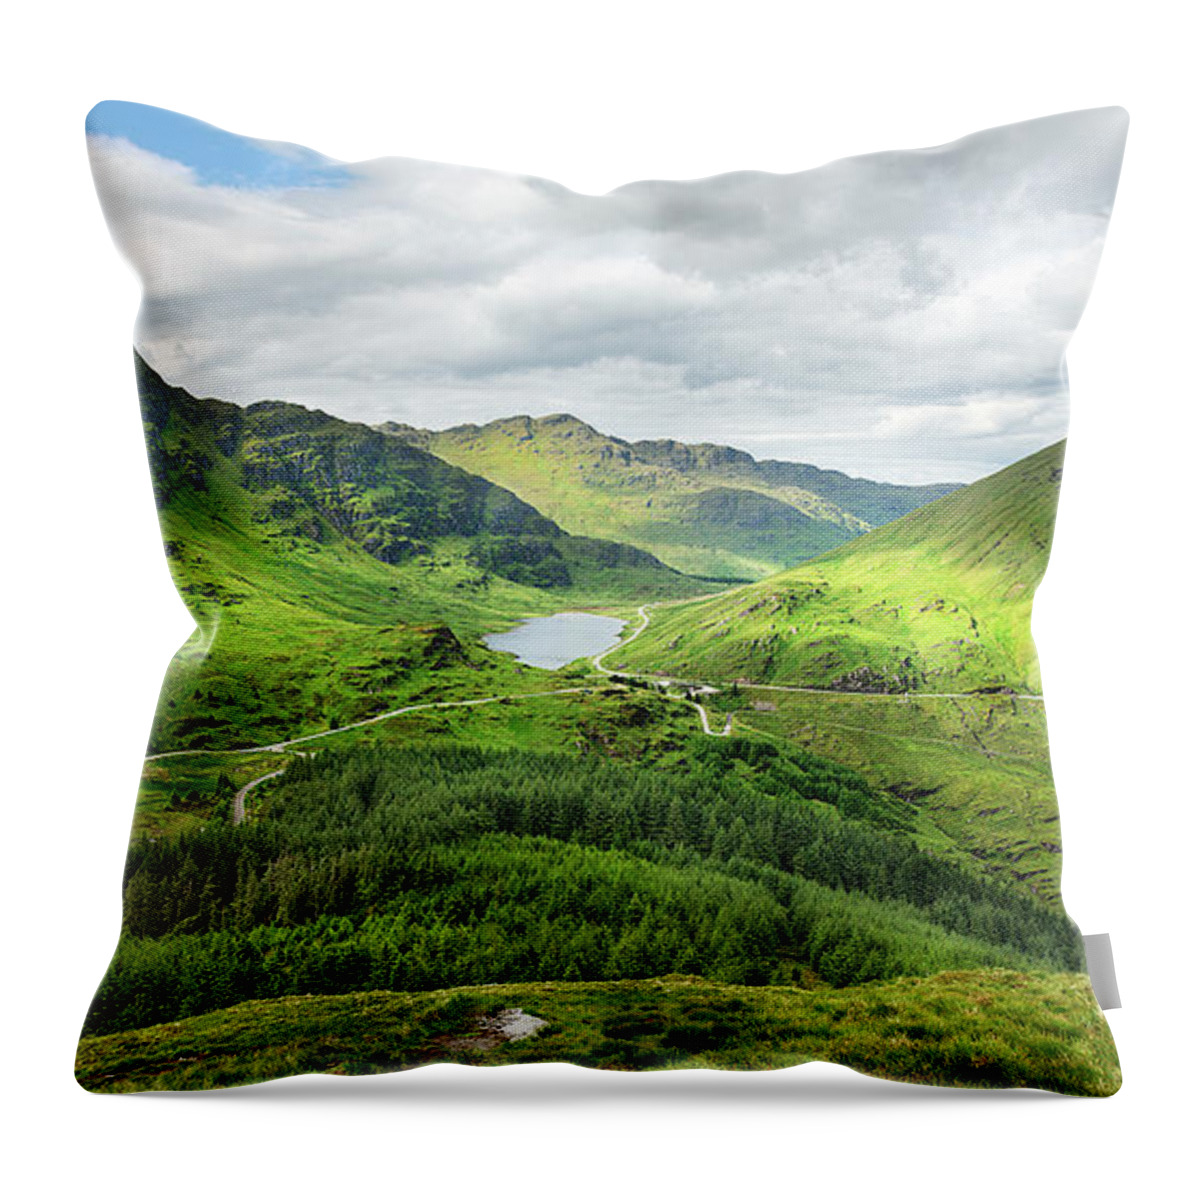 Scenics Throw Pillow featuring the photograph Lake In The Valley On A Cloudy Day by Andrew Tb Tan